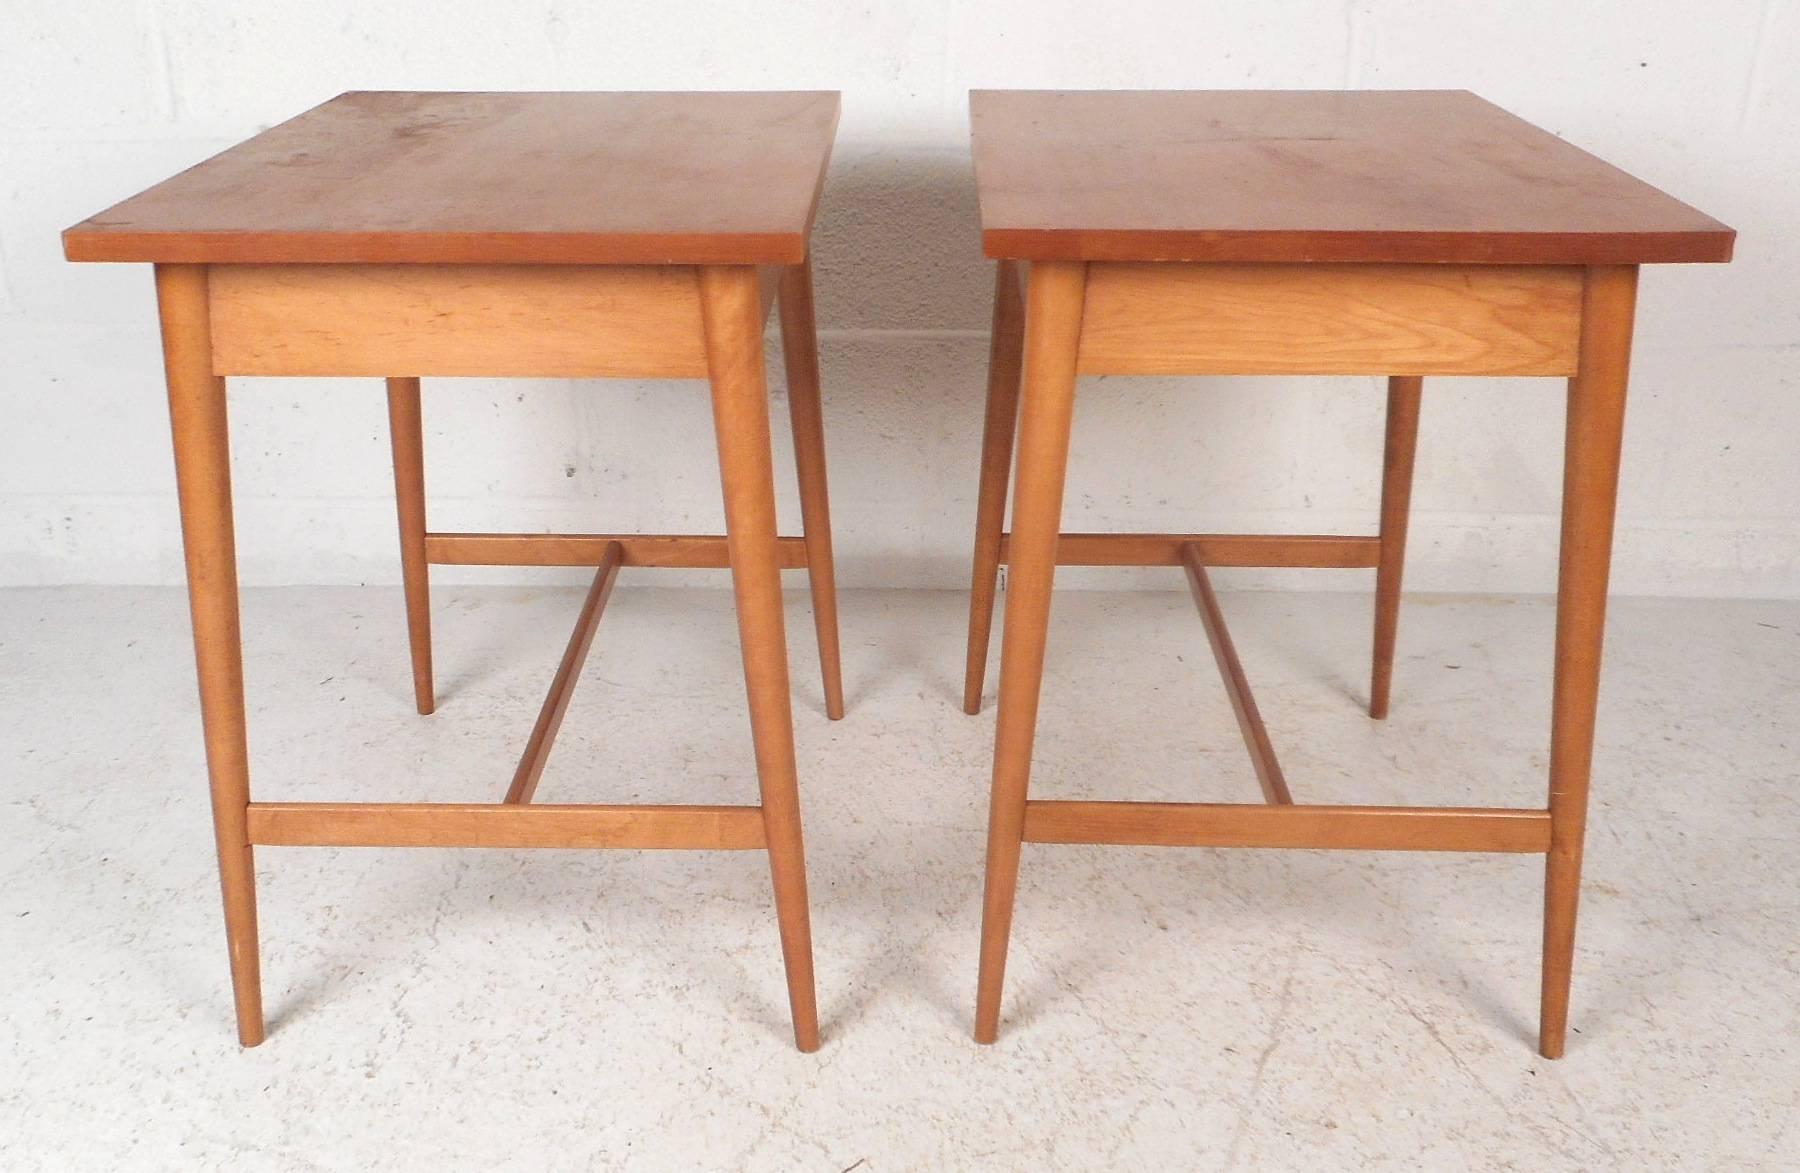 American Pair of Mid-Century Modern End Tables by Paul McCobb for Planner Group